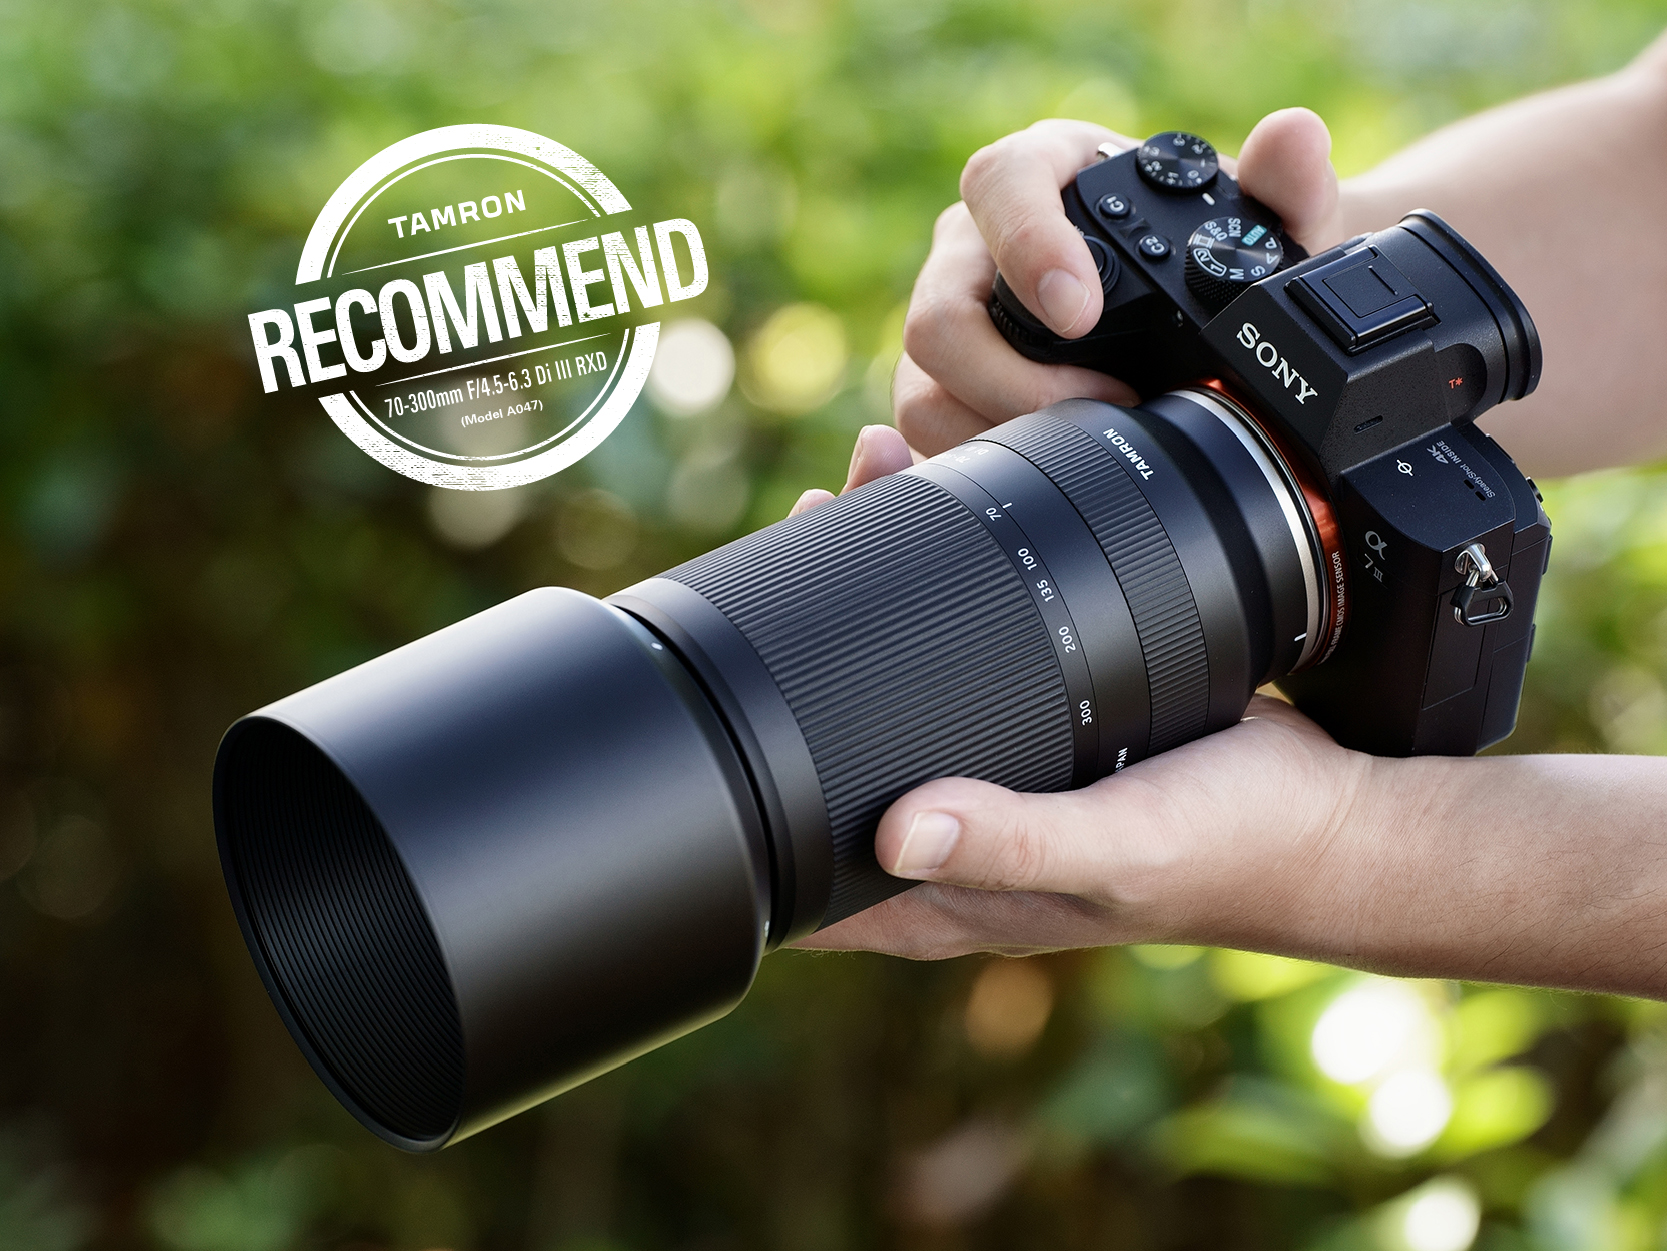 TAMRON RECOMMEND : TAMRON 70–300mm F/4.5-6.3 Di III RXD (Model A047)